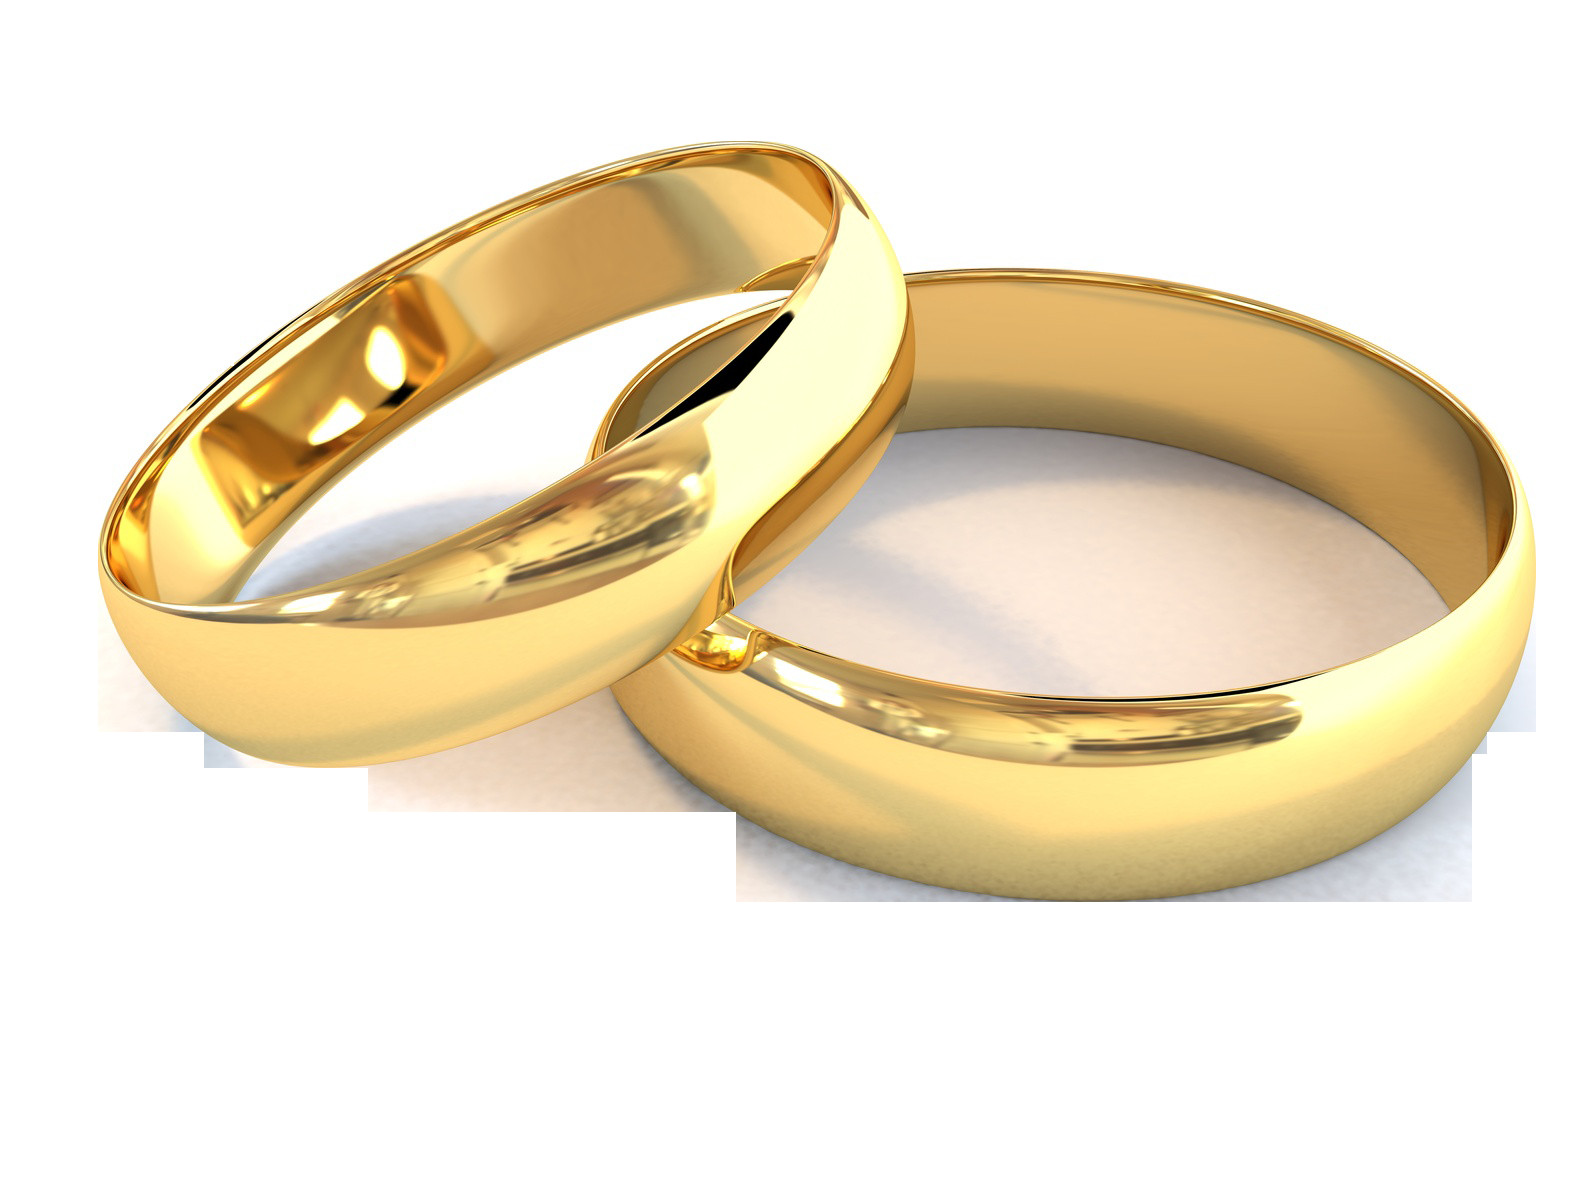 Free Wedding Rings
 Wedding Ring PNG free wedding ring clipart